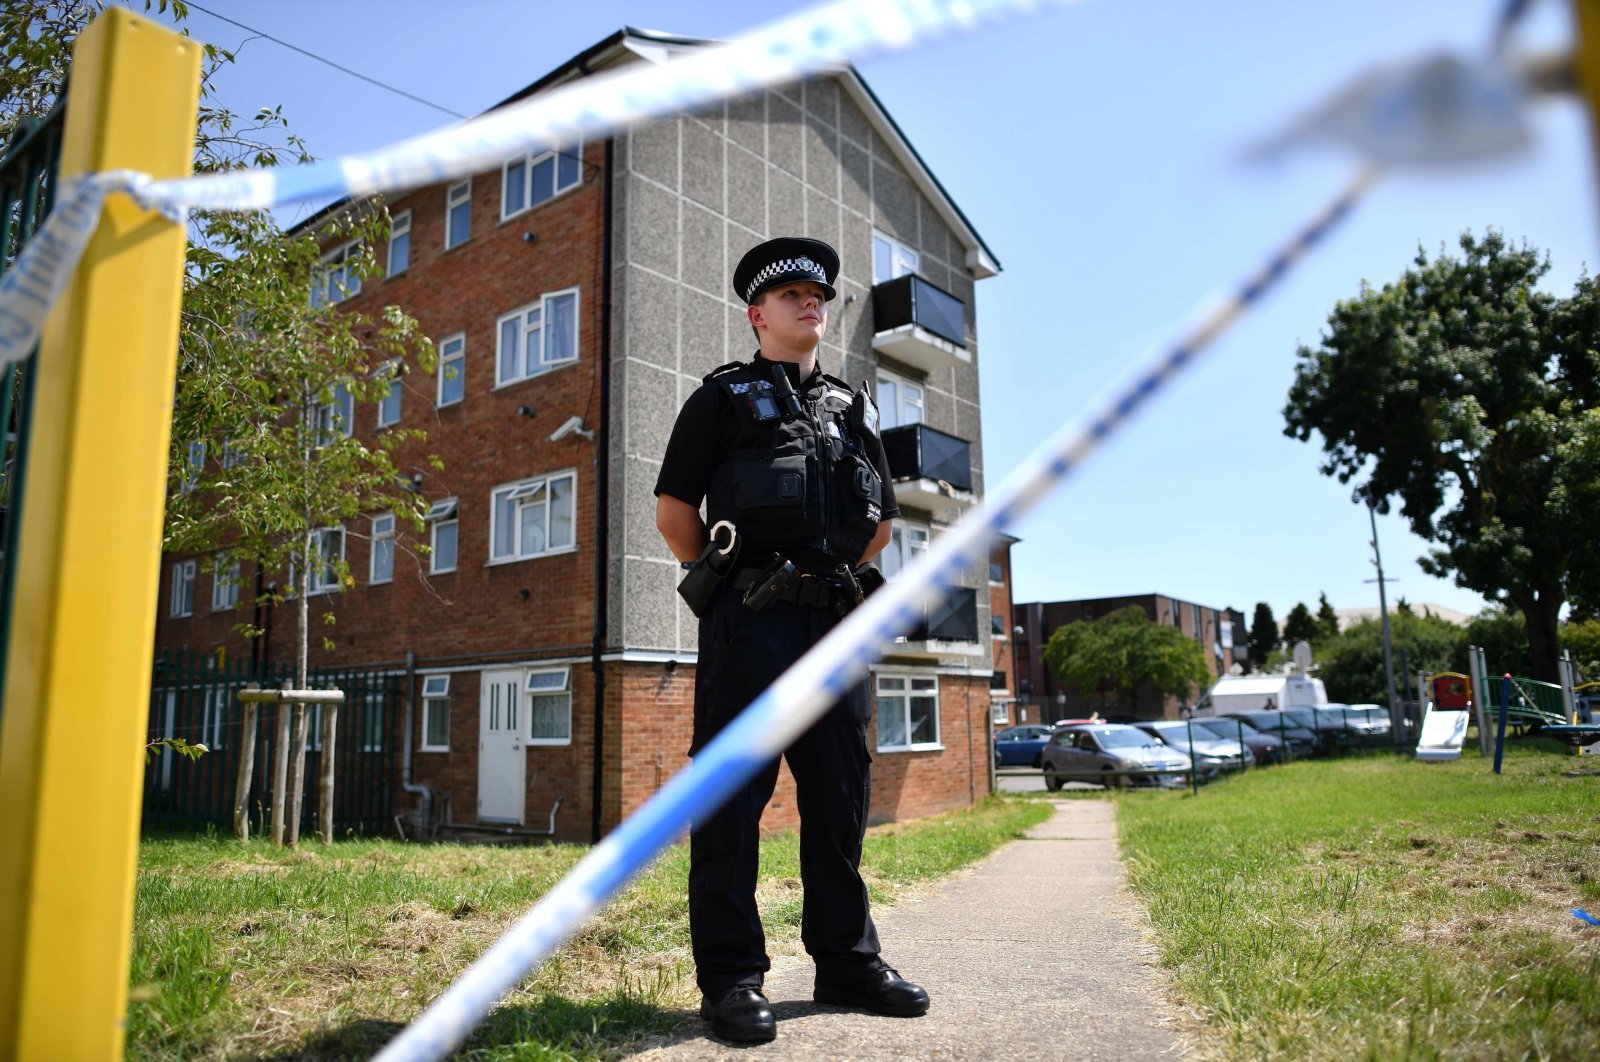 A police officer stands guard outside a cordoned off block of flats where the suspect of a multiple stabbing incident lived in Reading, west of London, June 23, 2020. (AFP)